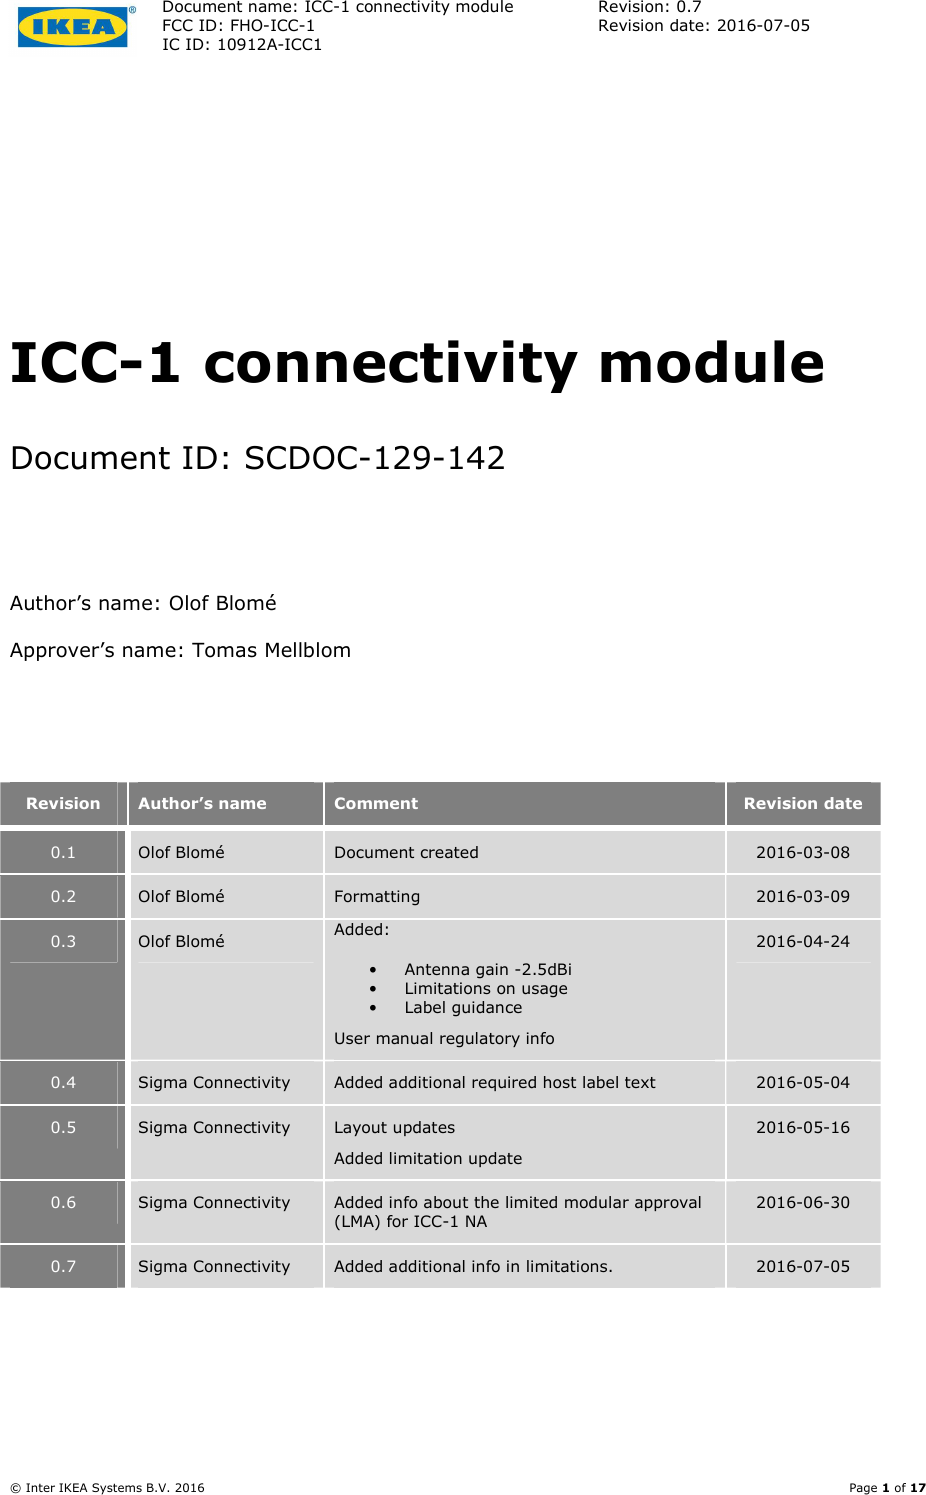 Document name: ICC-1 connectivity module  Revision: 0.7 FCC ID: FHO-ICC-1  Revision date: 2016-07-05  IC ID: 10912A-ICC1     © Inter IKEA Systems B.V. 2016    Page 1 of 17   ICC-1 connectivity module Document ID: SCDOC-129-142  Author’s name: Olof Blomé Approver’s name: Tomas Mellblom   Revision  Author’s name  Comment  Revision date 0.1 Olof Blomé  Document created  2016-03-08 0.2 Olof Blomé  Formatting  2016-03-09 0.3 Olof Blomé  Added: • Antenna gain -2.5dBi • Limitations on usage • Label guidance User manual regulatory info 2016-04-24 0.4 Sigma Connectivity  Added additional required host label text  2016-05-04 0.5 Sigma Connectivity  Layout updates Added limitation update 2016-05-16 0.6 Sigma Connectivity  Added info about the limited modular approval (LMA) for ICC-1 NA  2016-06-30 0.7 Sigma Connectivity  Added additional info in limitations.  2016-07-05 